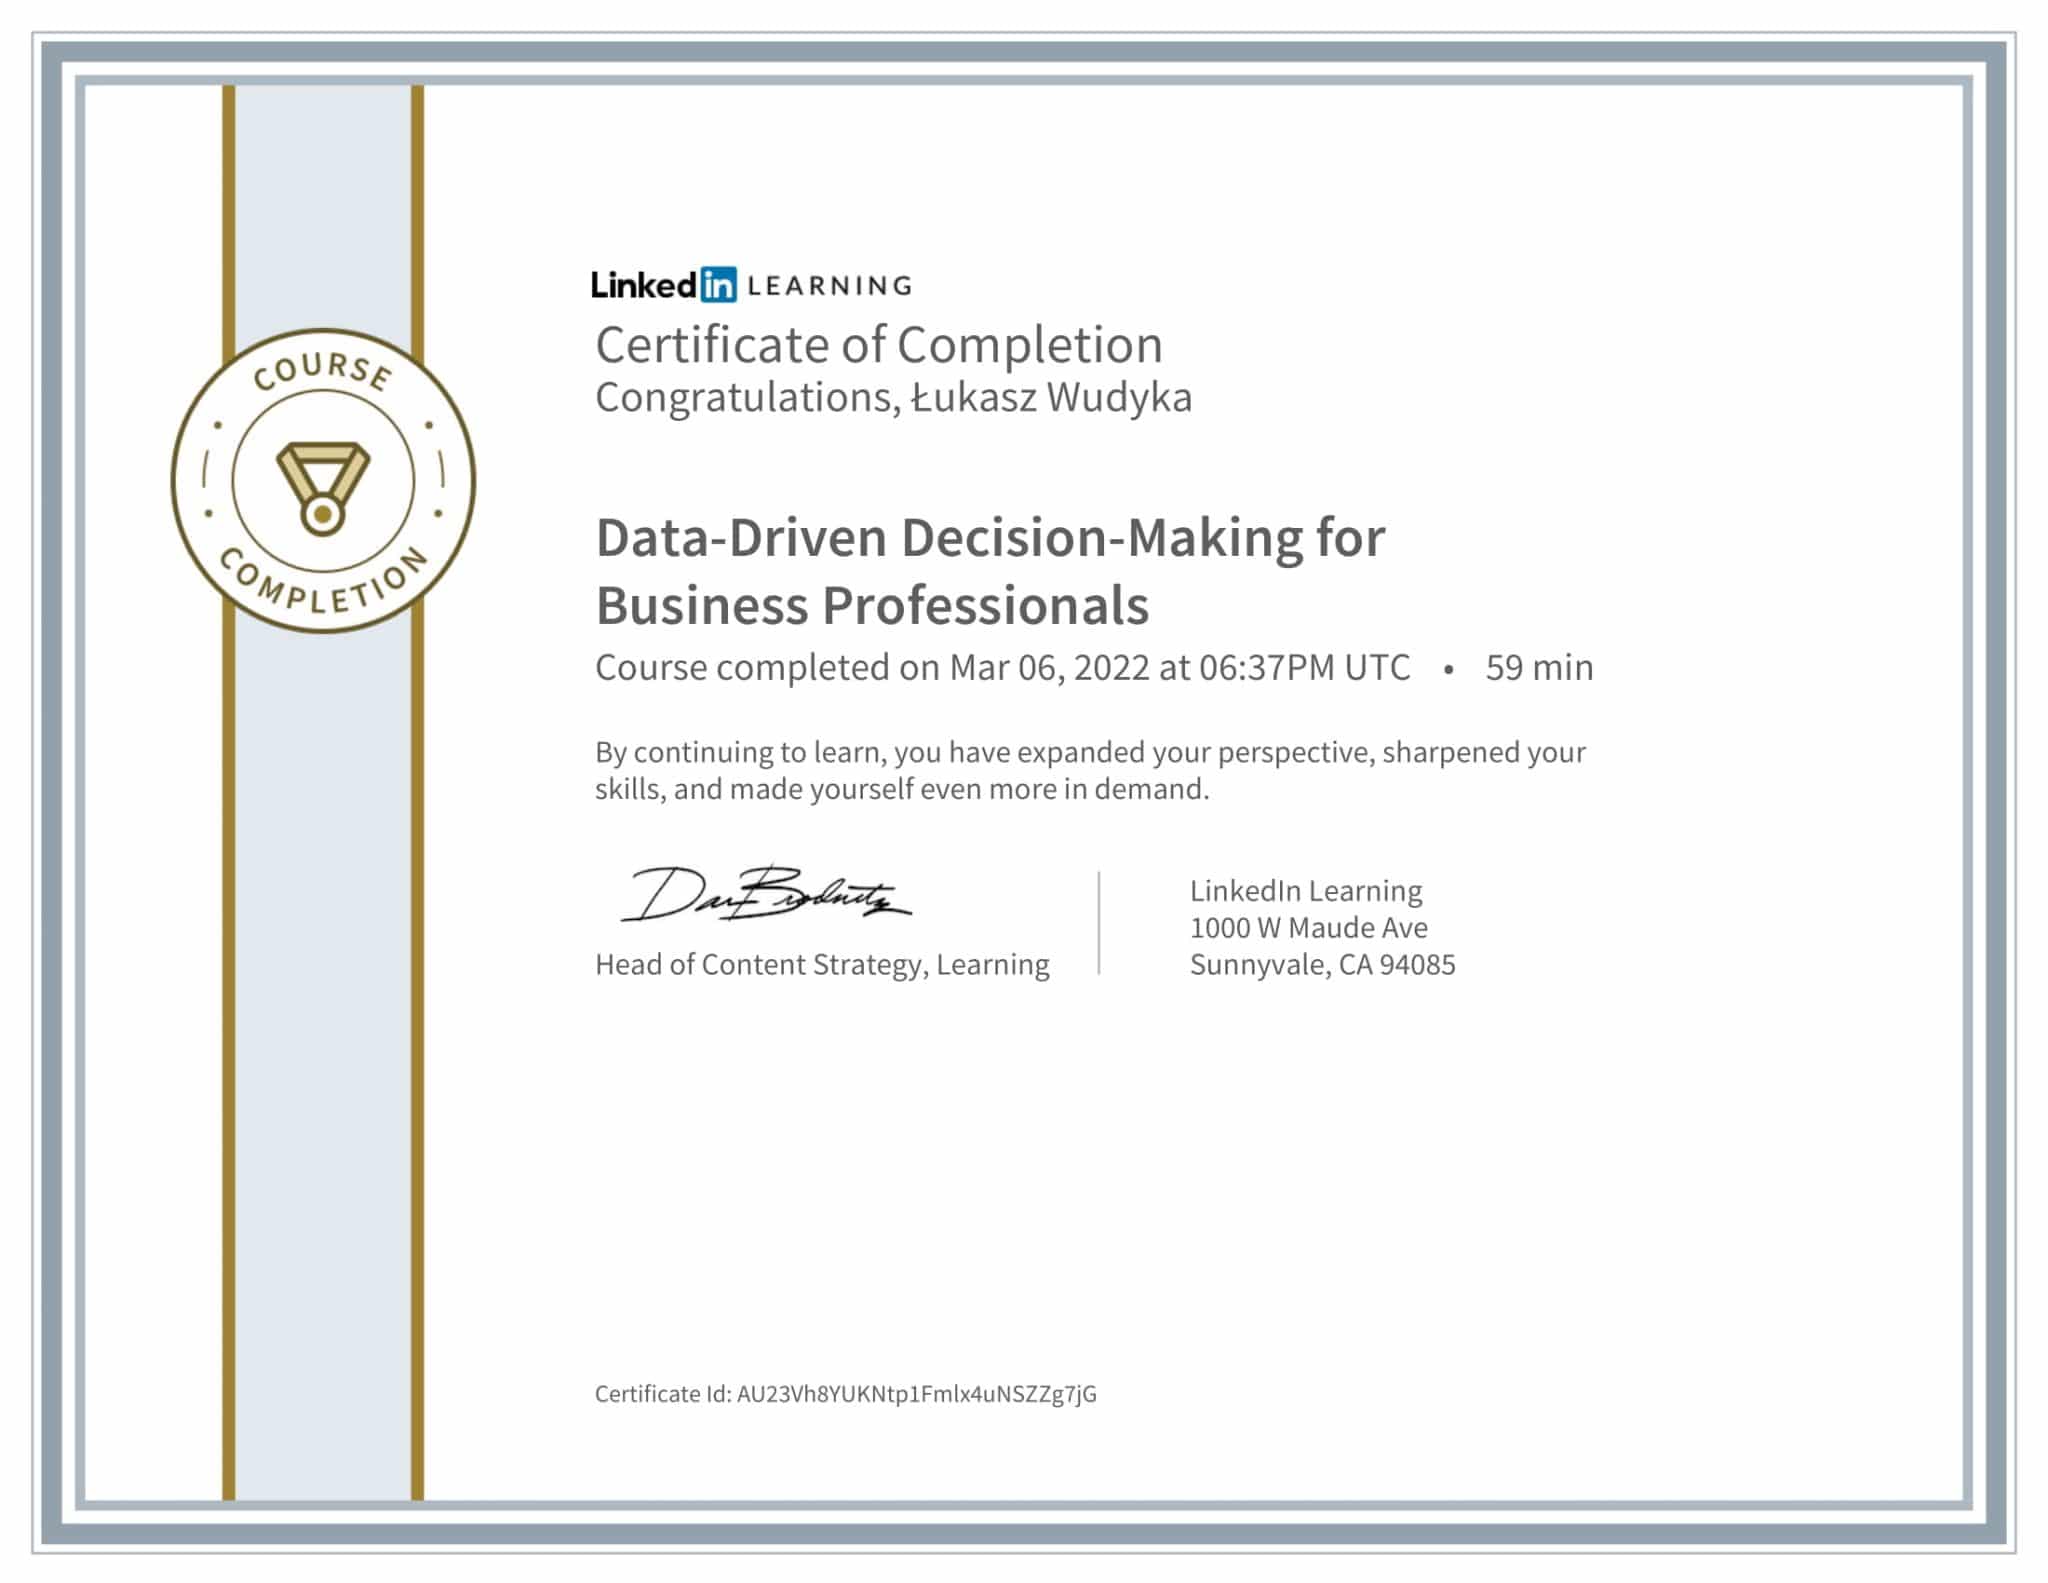 CertificateOfCompletion_DataDriven DecisionMaking for Business Professionals (2)-1